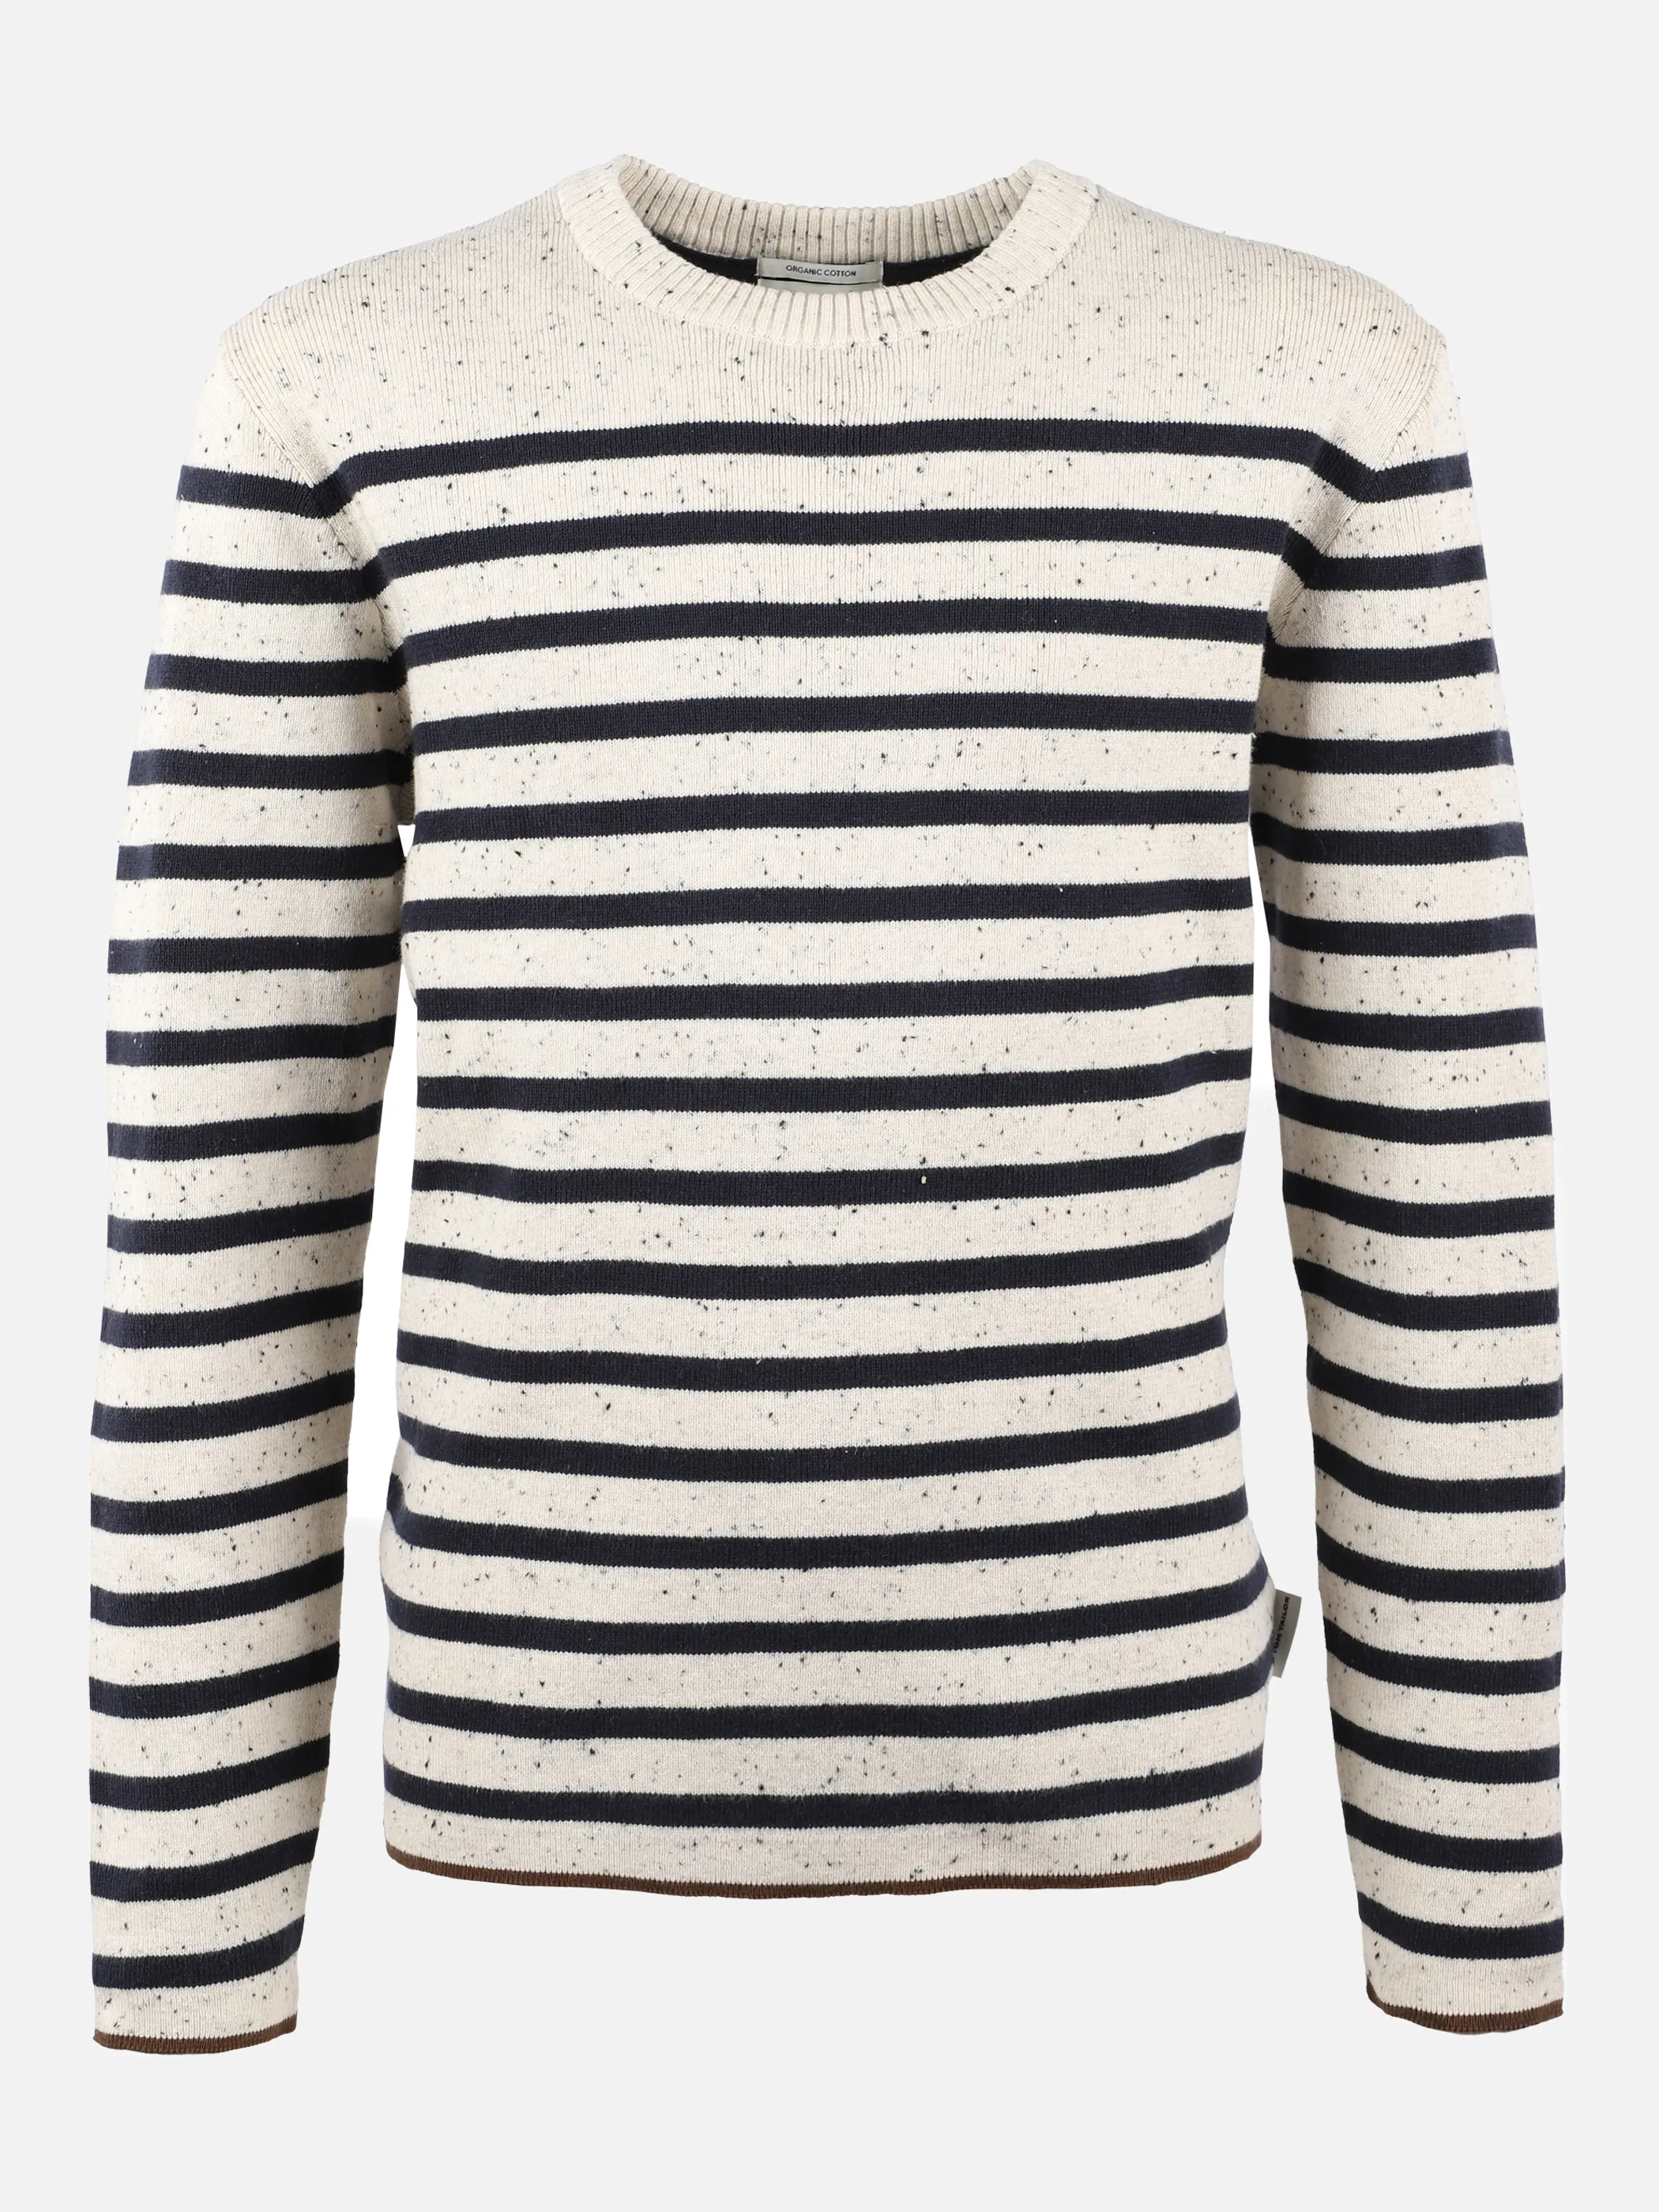 Tom Tailor 1033166 striped knitted pullov Weiß 869646 30448 1